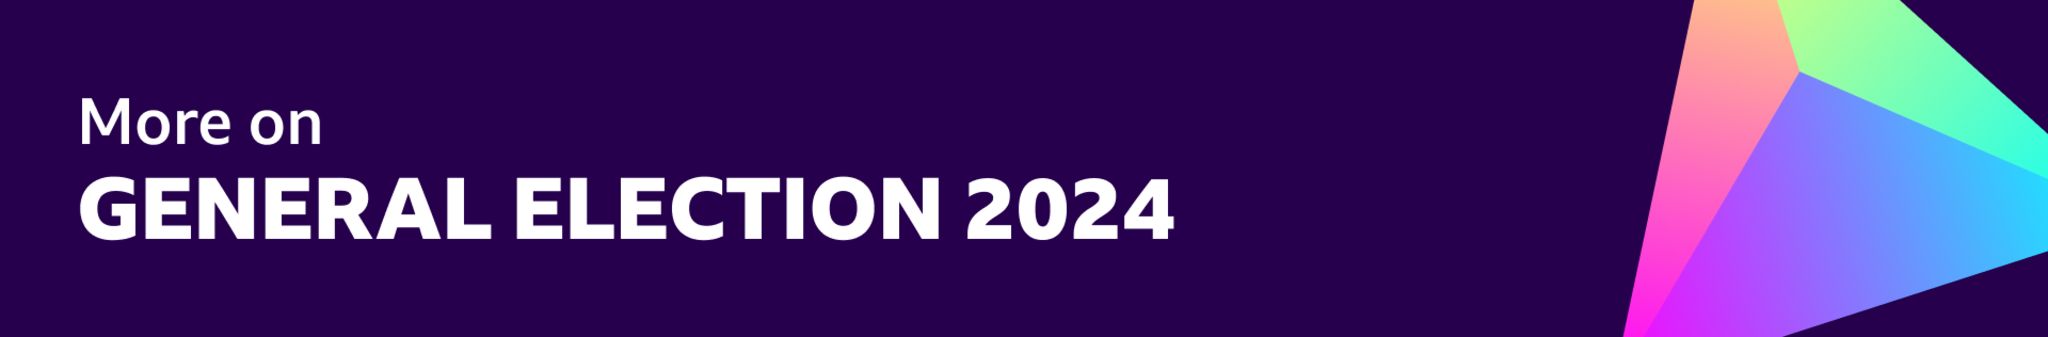 Banner image reading "More on GENERAL ELECTION 2024"